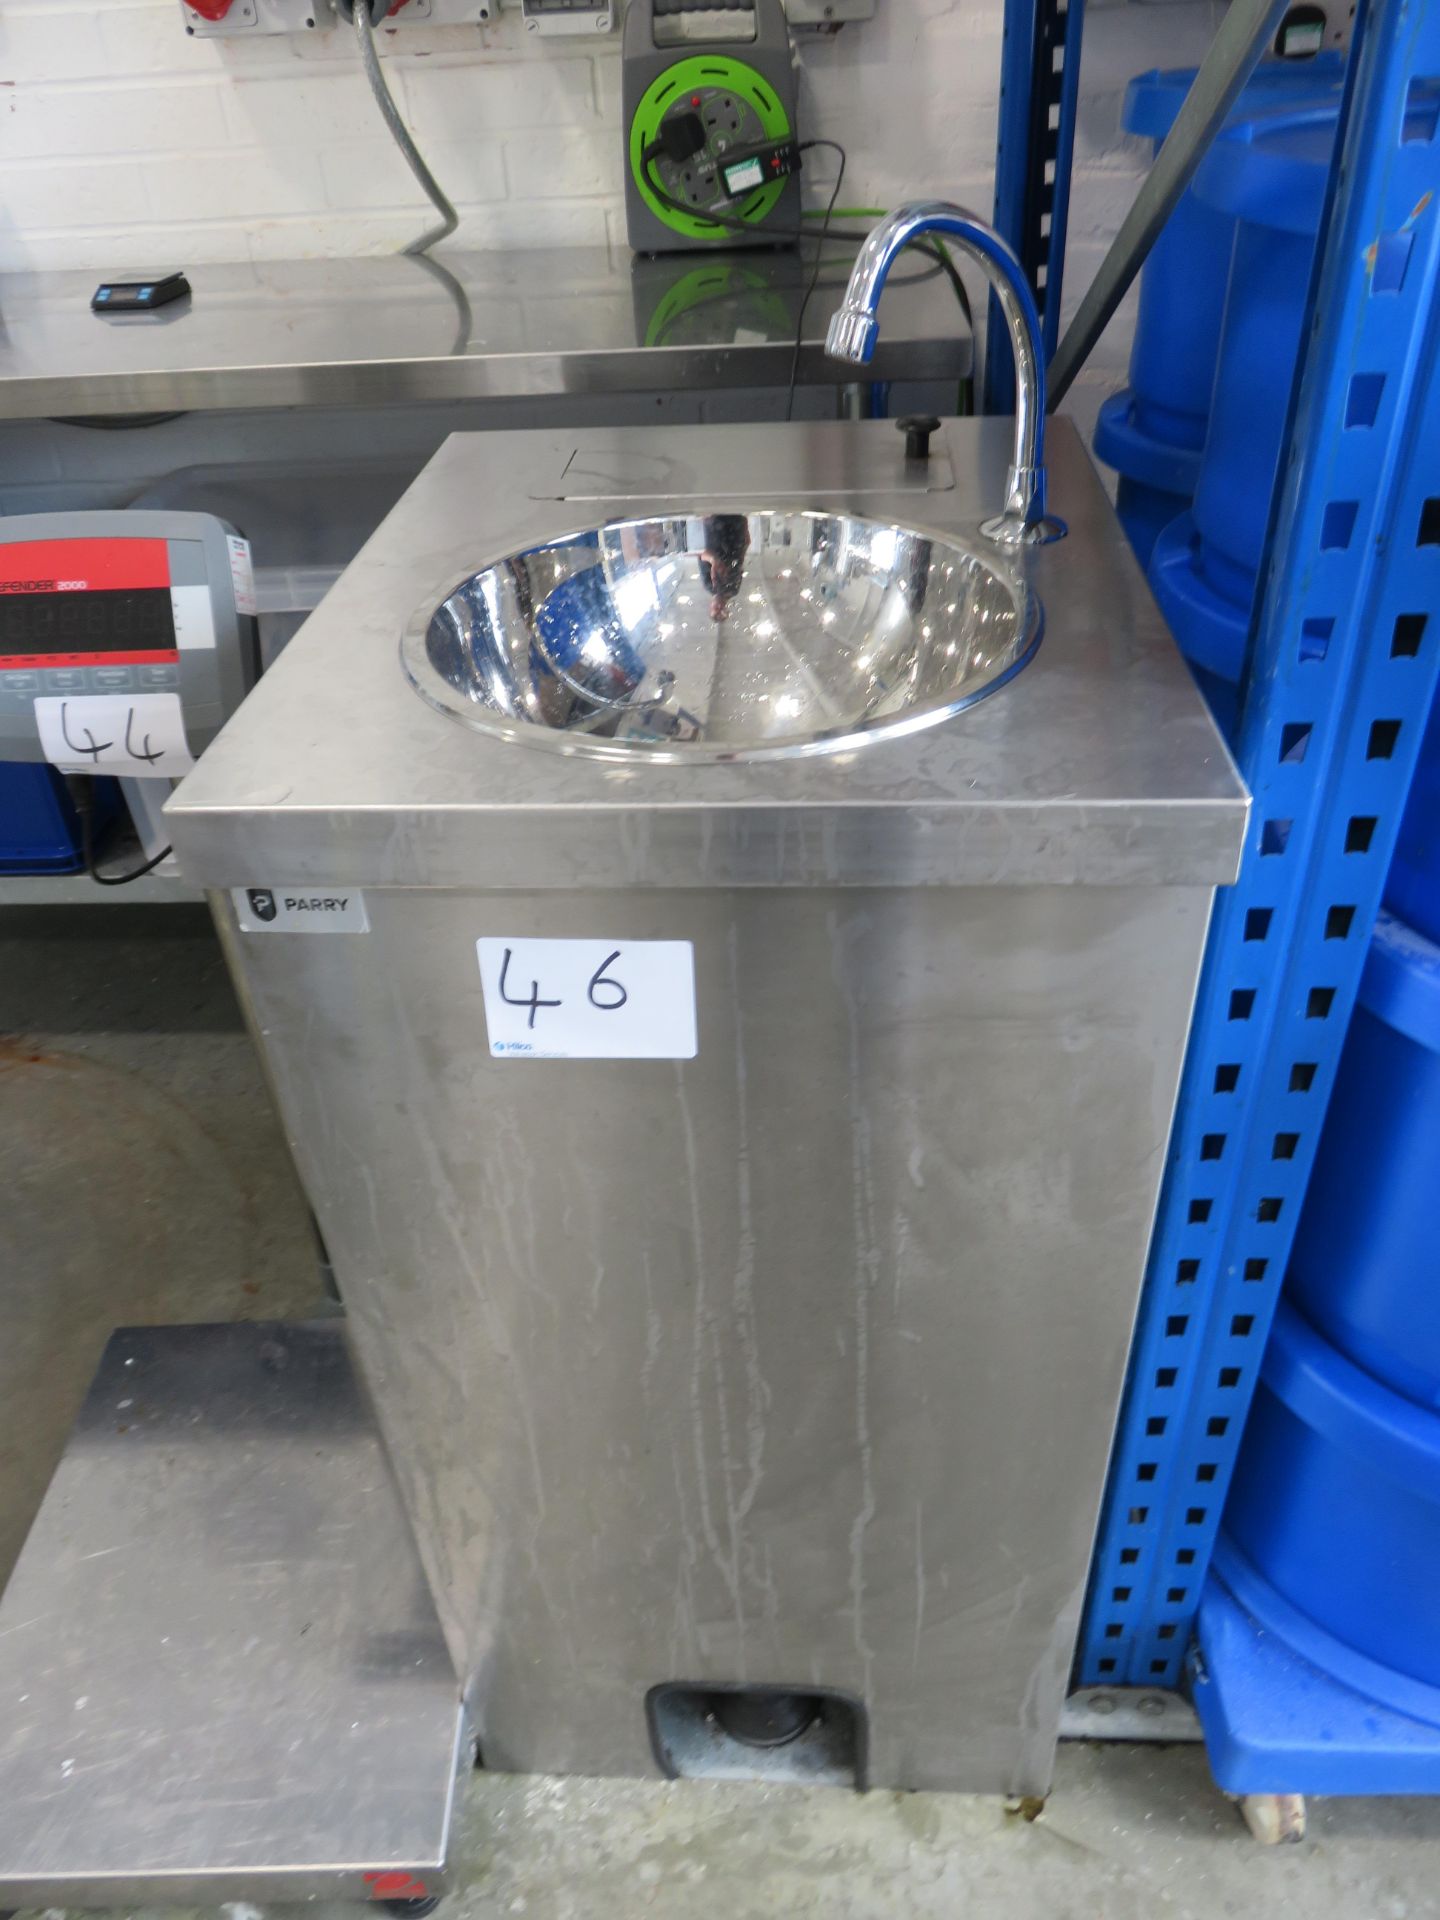 1, Parry Catering Equipment MWBT Stainless Steel Pedal Operated Cold Water Hand Wash Basin. Serial N